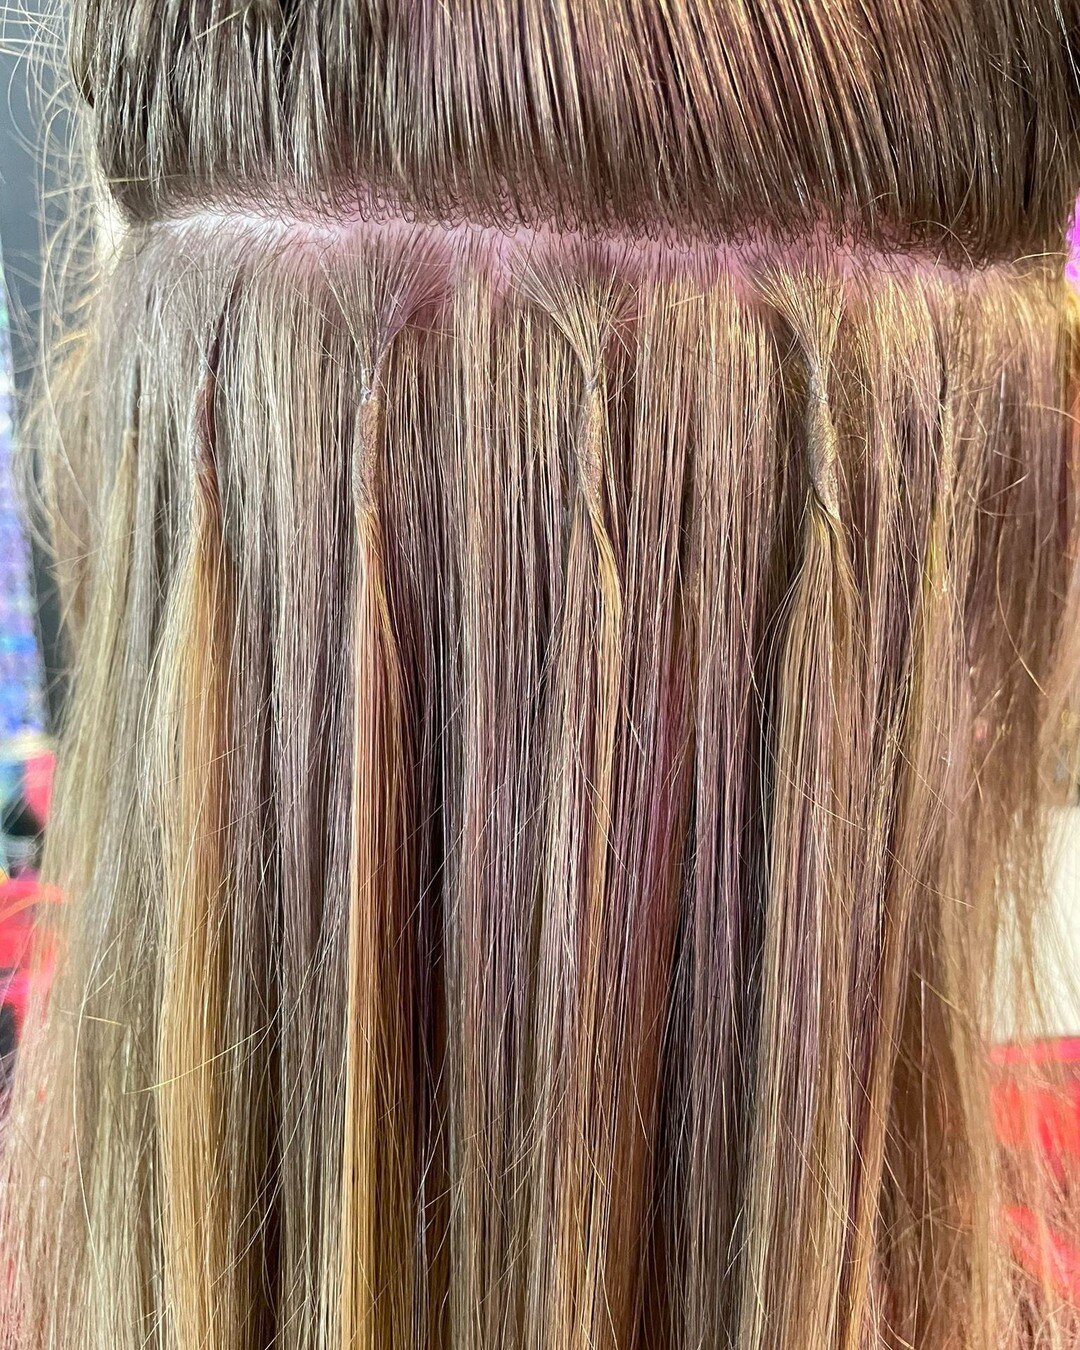 Take a peek under the hood 😍 

Can you spot the bond? Keratin flat tips! ✨

#edenrosextensions #keratinflattip  #ukextensions #extensionspecialist #yeovilbusiness #yeovilhairstylist #ukhairsalon